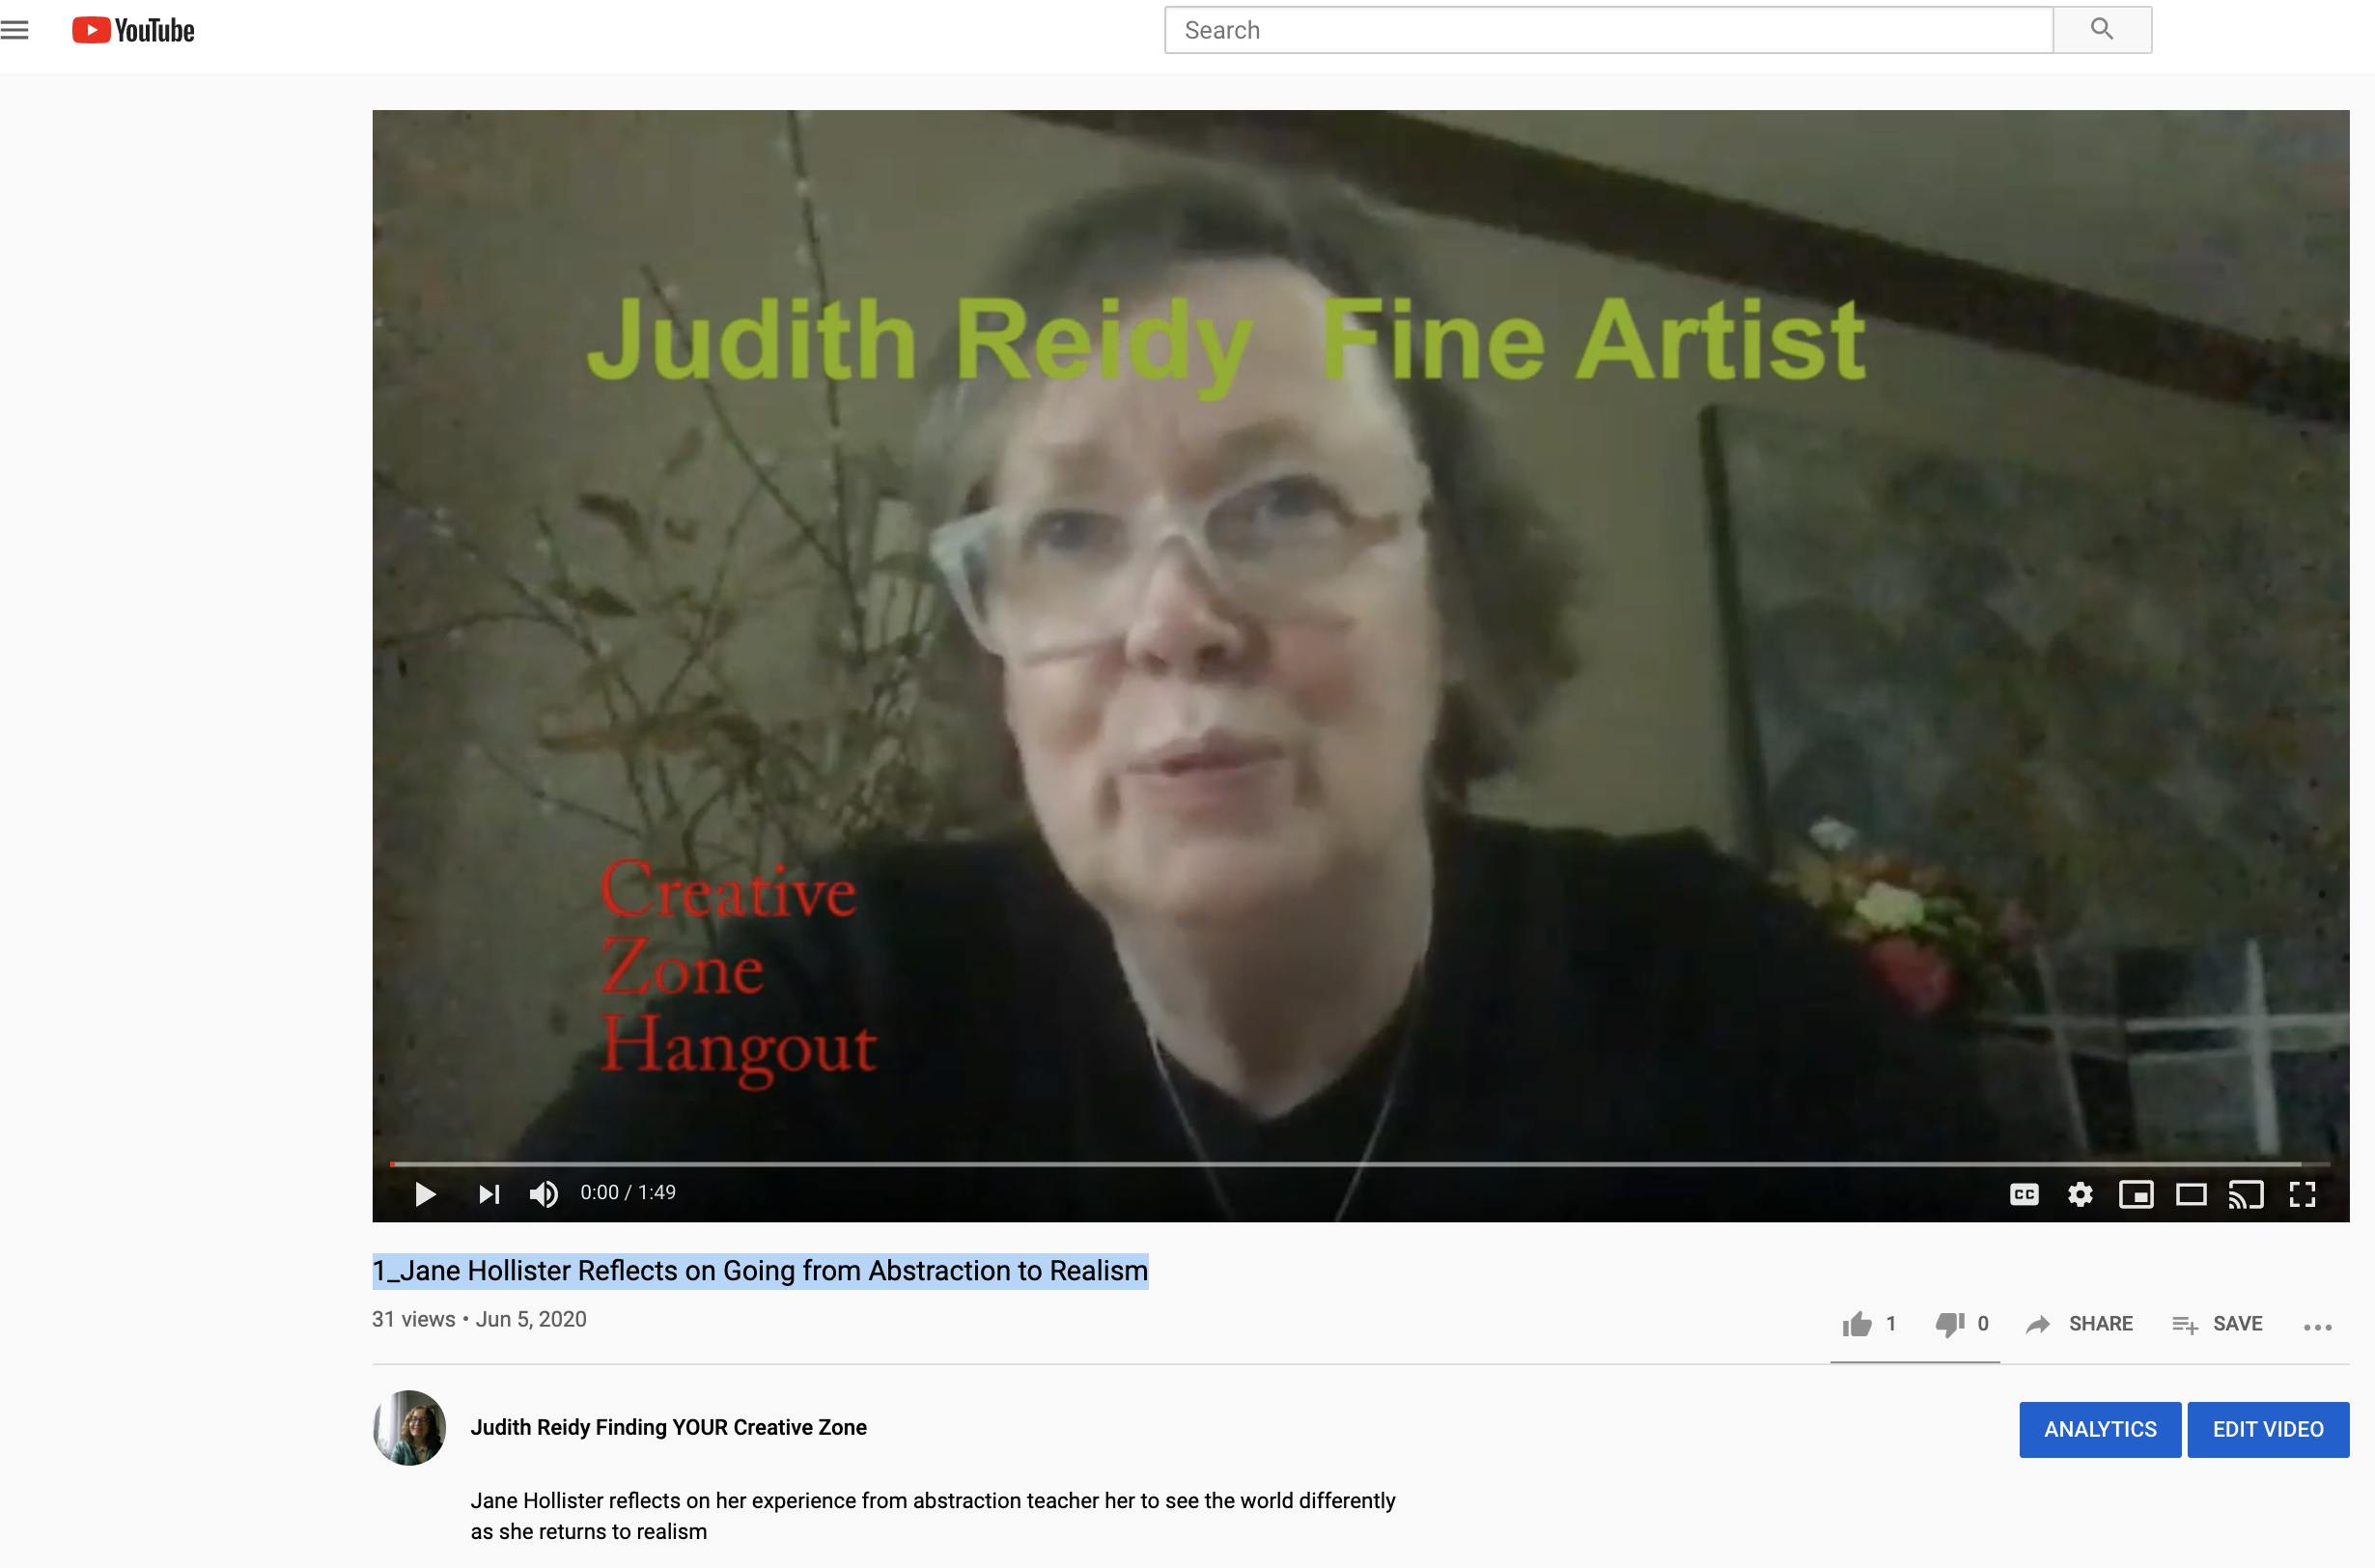 1_Jane Hollister Reflects on Going from Abstraction to Realism